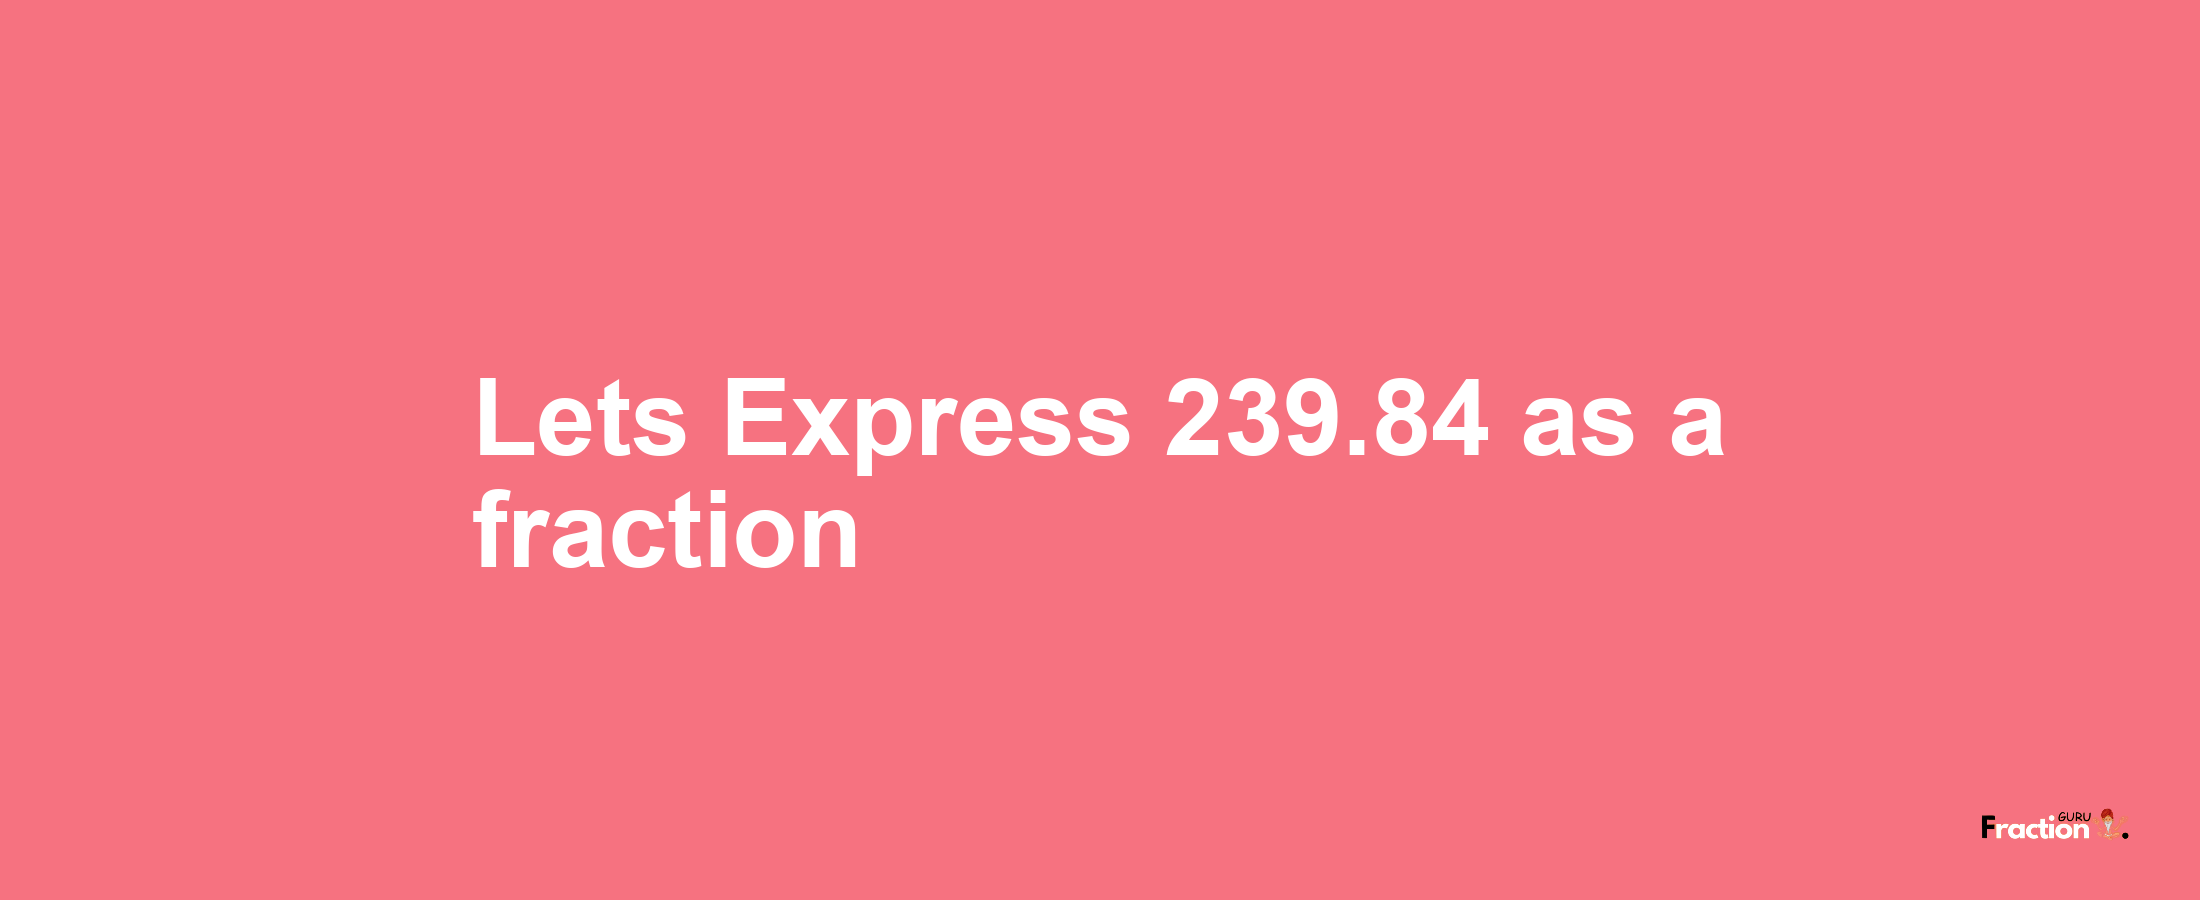 Lets Express 239.84 as afraction